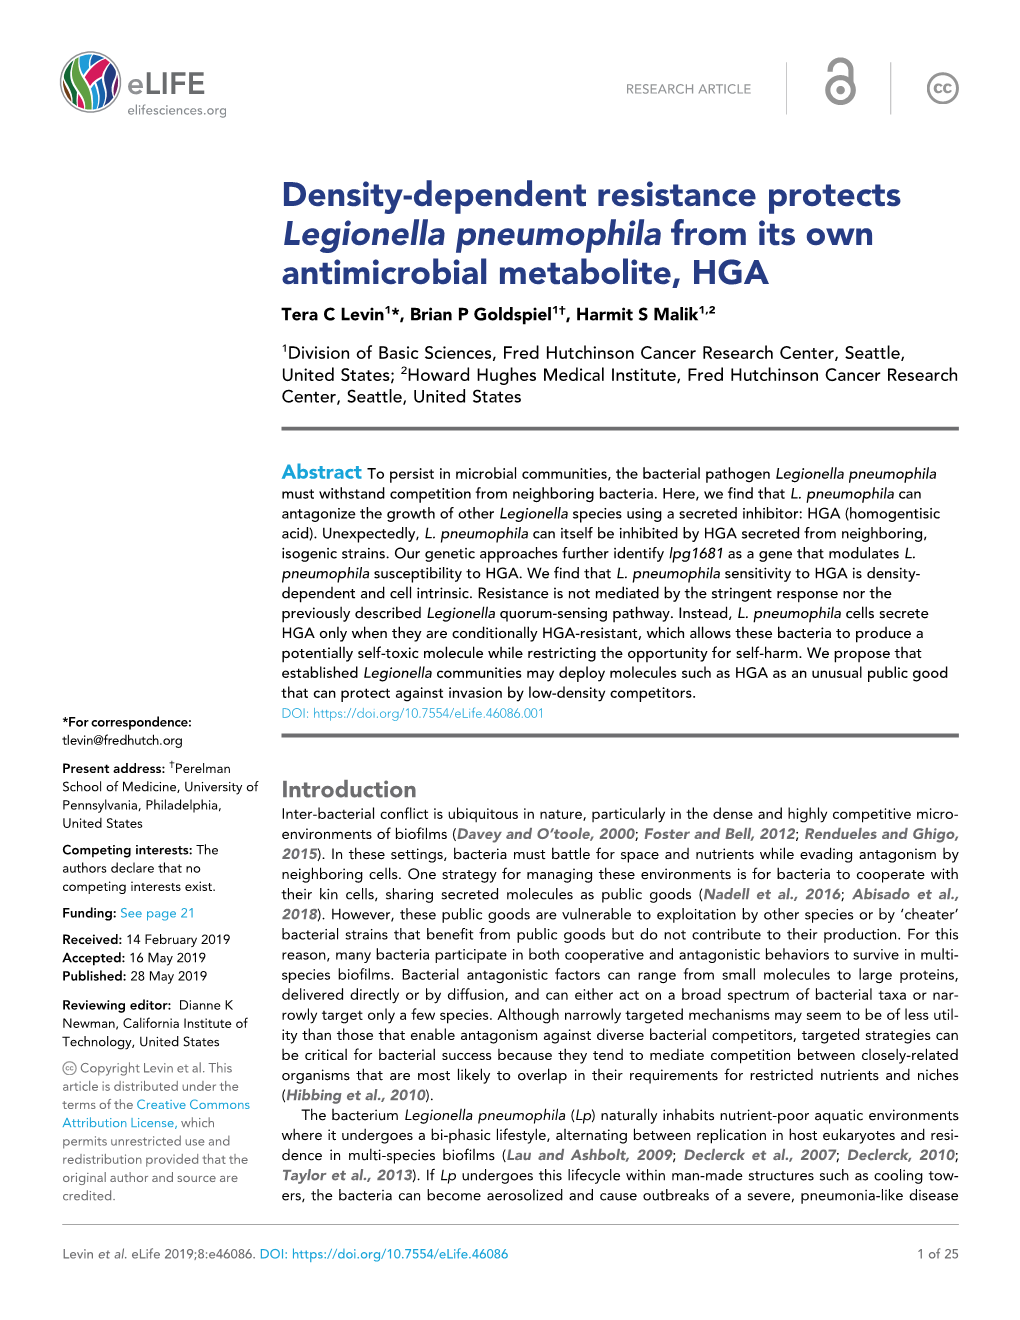 Density-Dependent Resistance Protects Legionella Pneumophila from Its Own Antimicrobial Metabolite, HGA Tera C Levin1*, Brian P Goldspiel1†, Harmit S Malik1,2